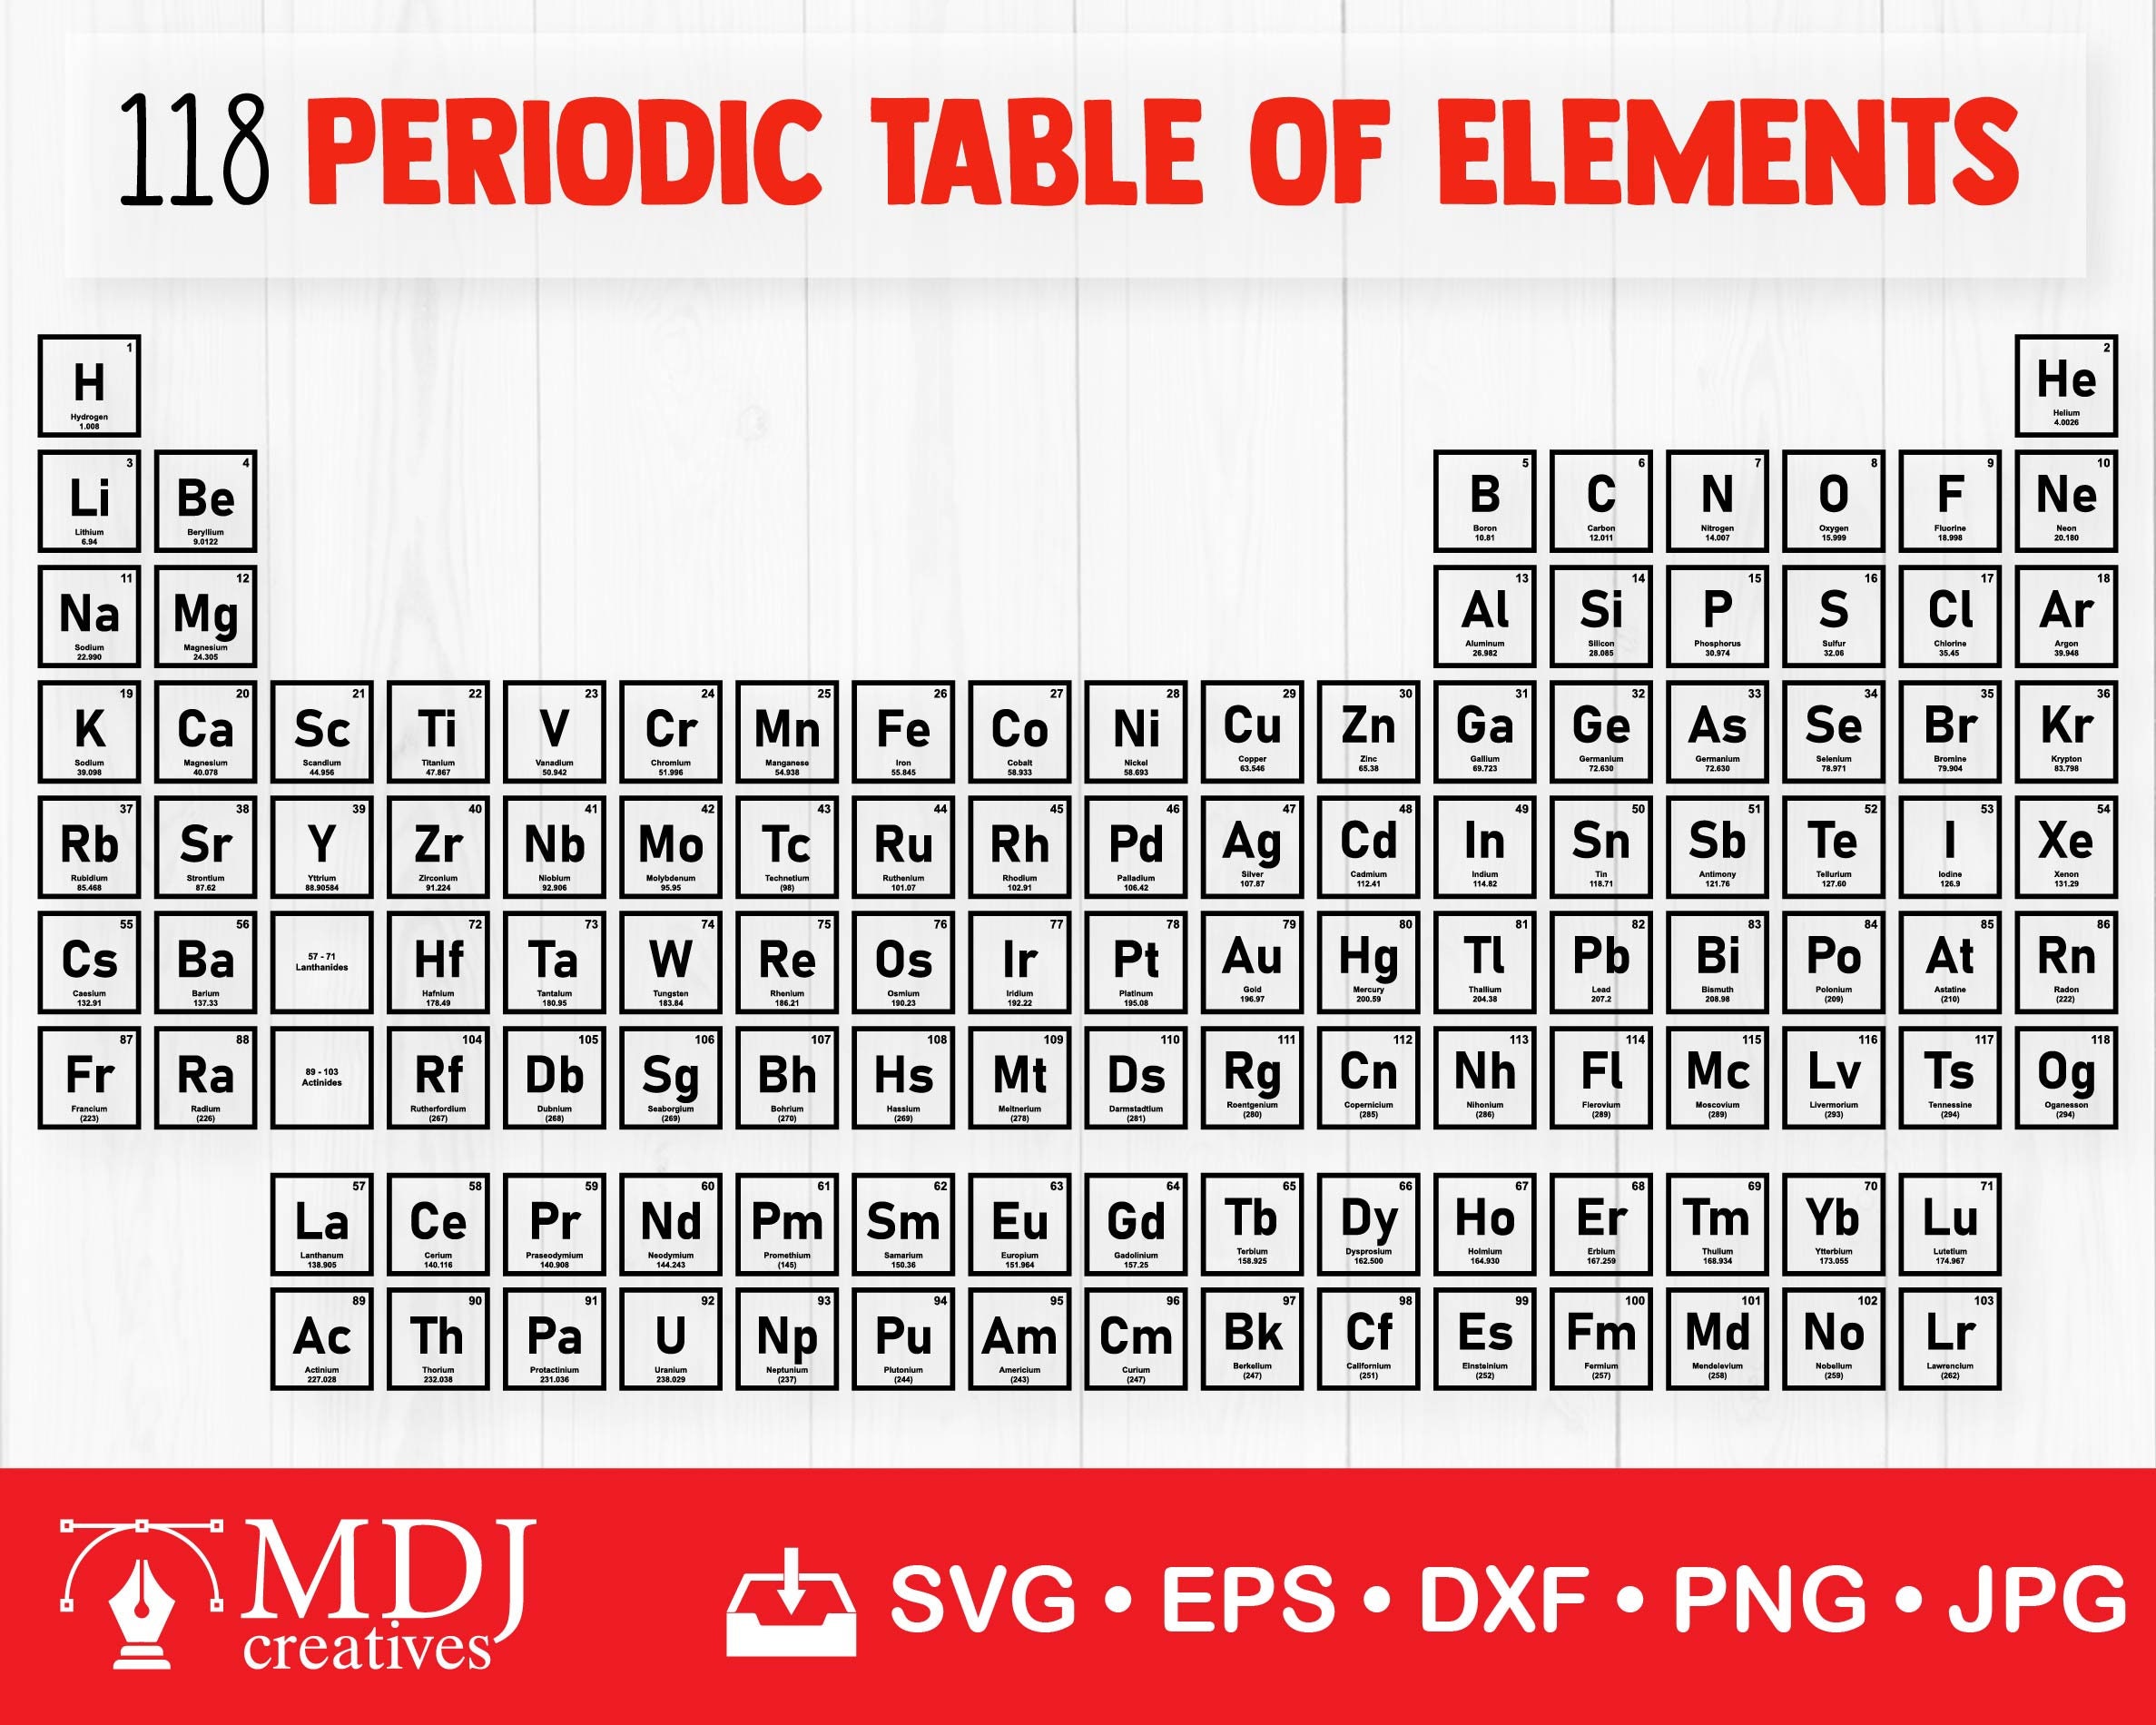 Custom Fondant Periodic Table of Elements, Fondant Cake Topper, Edible  Decorations for Cakes Set of 8 Letters elements 